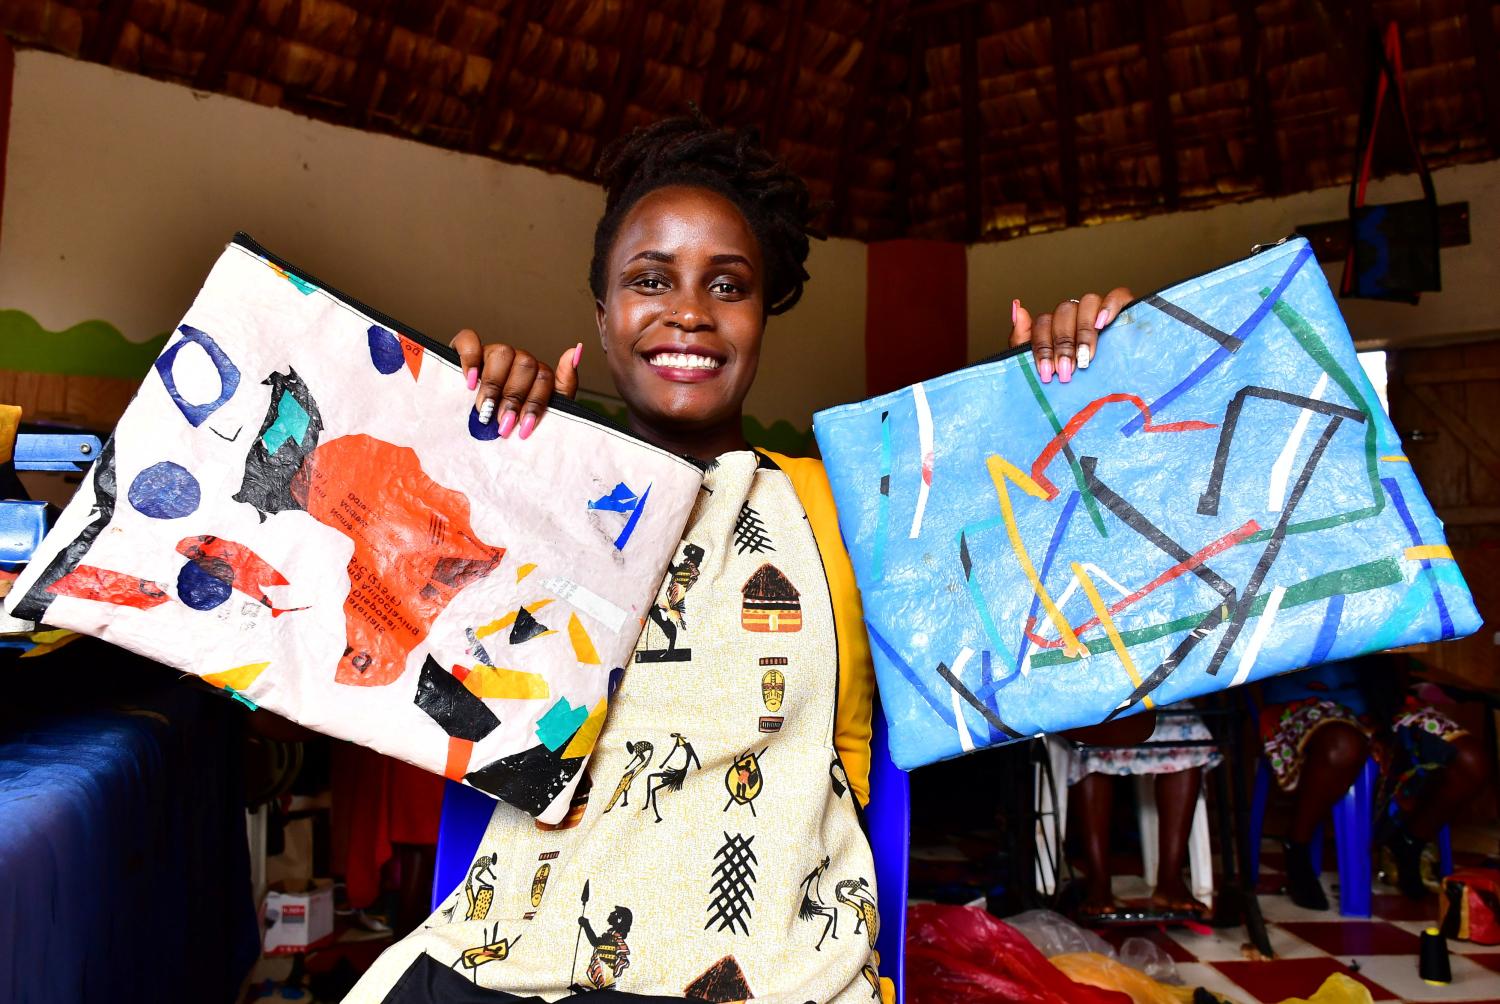 Ugandan self-proclaimed "waste-preneur" Faith Aweko displays finished hand bags made from transformed polythene waste at the Reform Africa in Social Innovation Academy (SINA), in Mpigi district, Central Uganda April 20, 2021. Picture taken April 20, 2021. REUTERS/Abubaker Lubowa